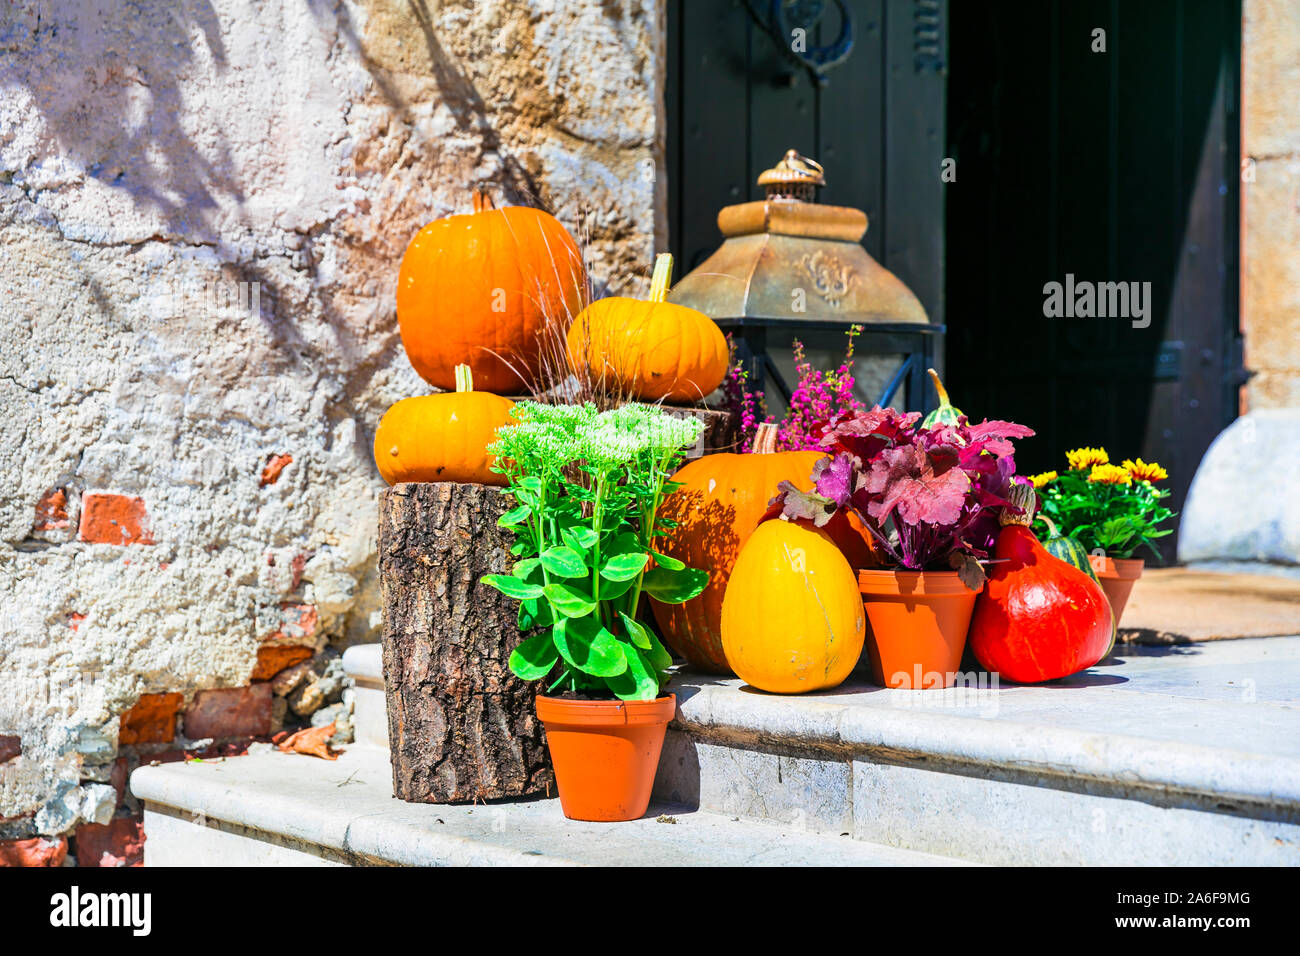 autumn still life and street decoration with pumpkins Stock Photo